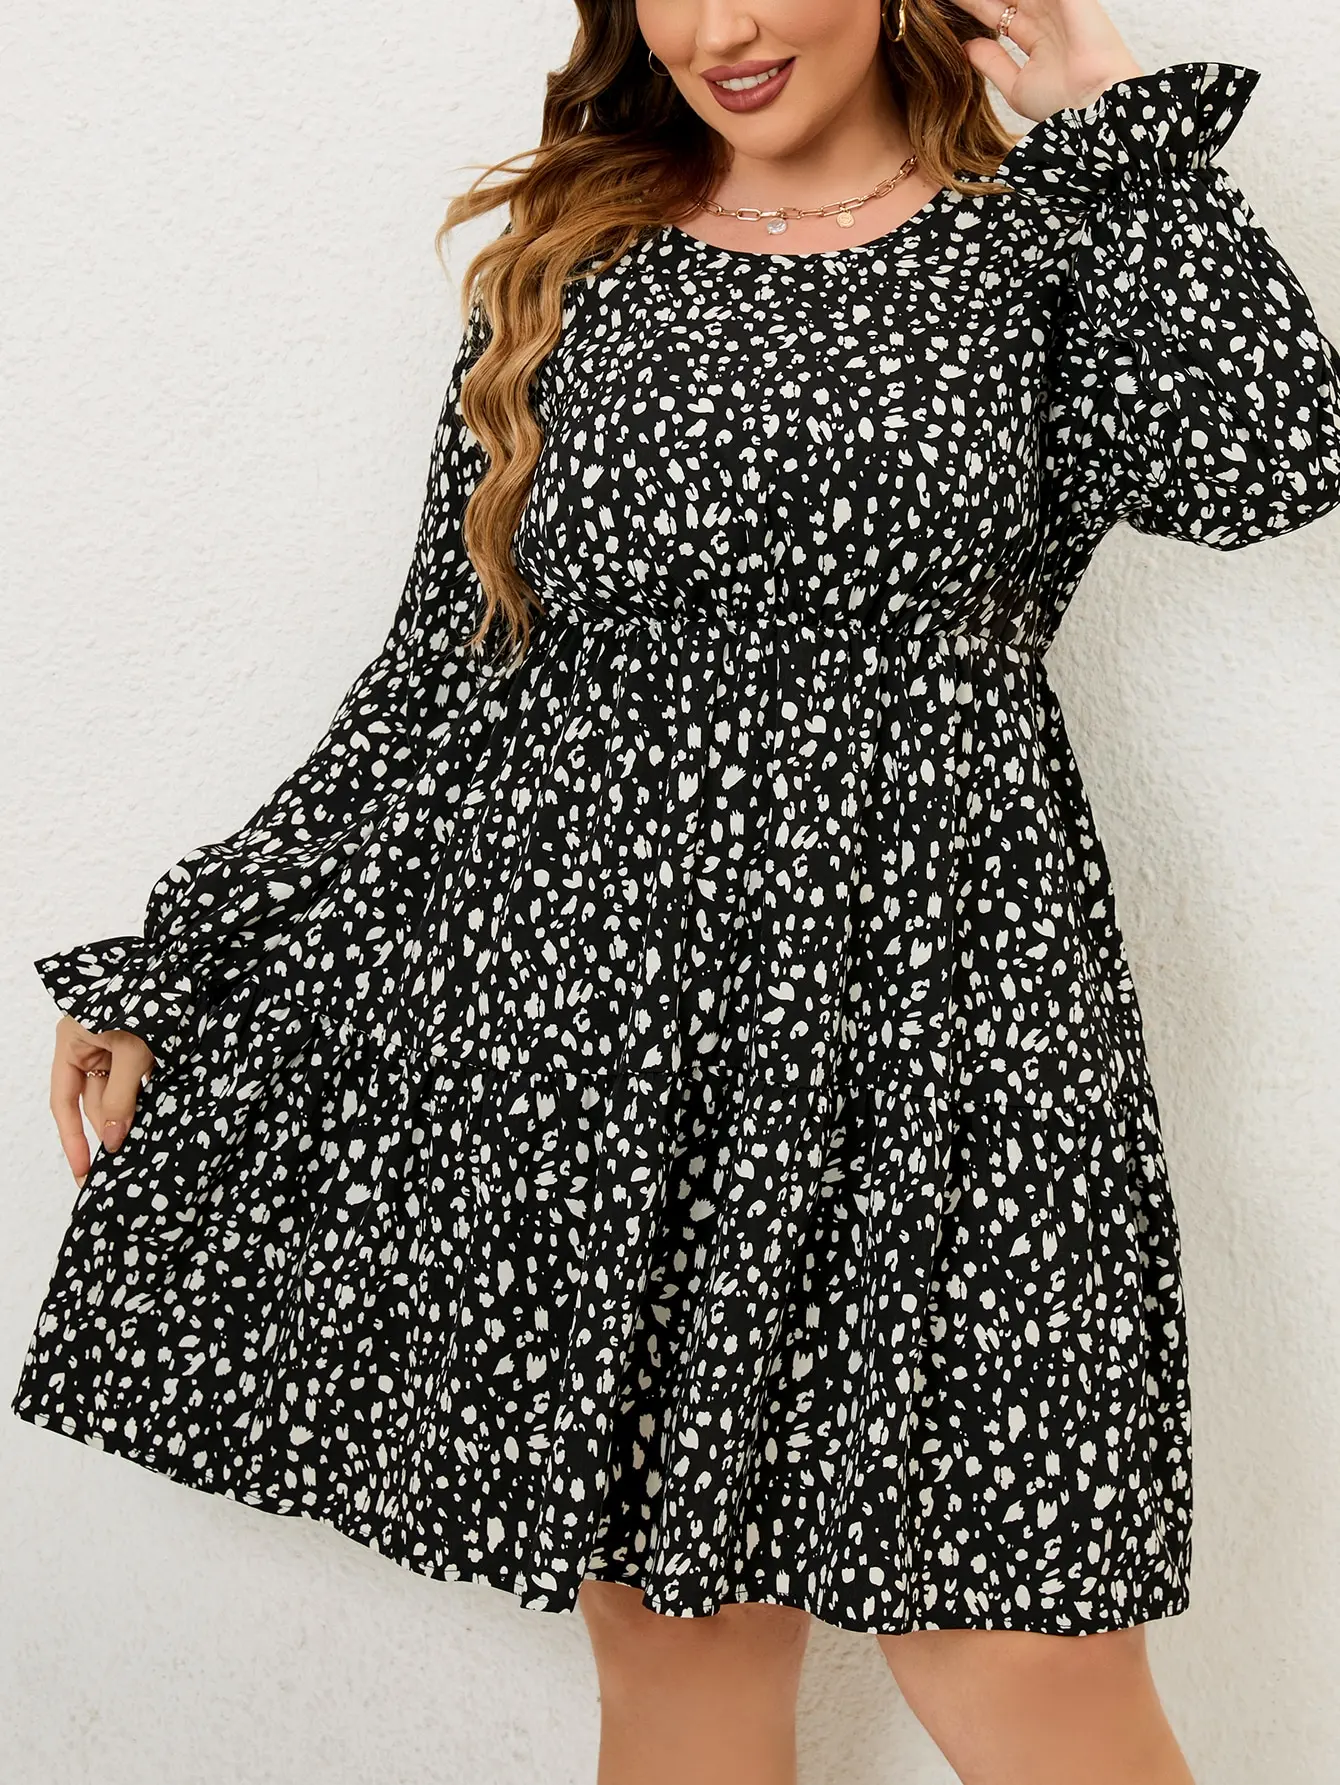 

Finjani Women's Plus Size Dresses Floral Print Flare Sleeve O-Neck Hem Dress Casual Clothing For Summer New